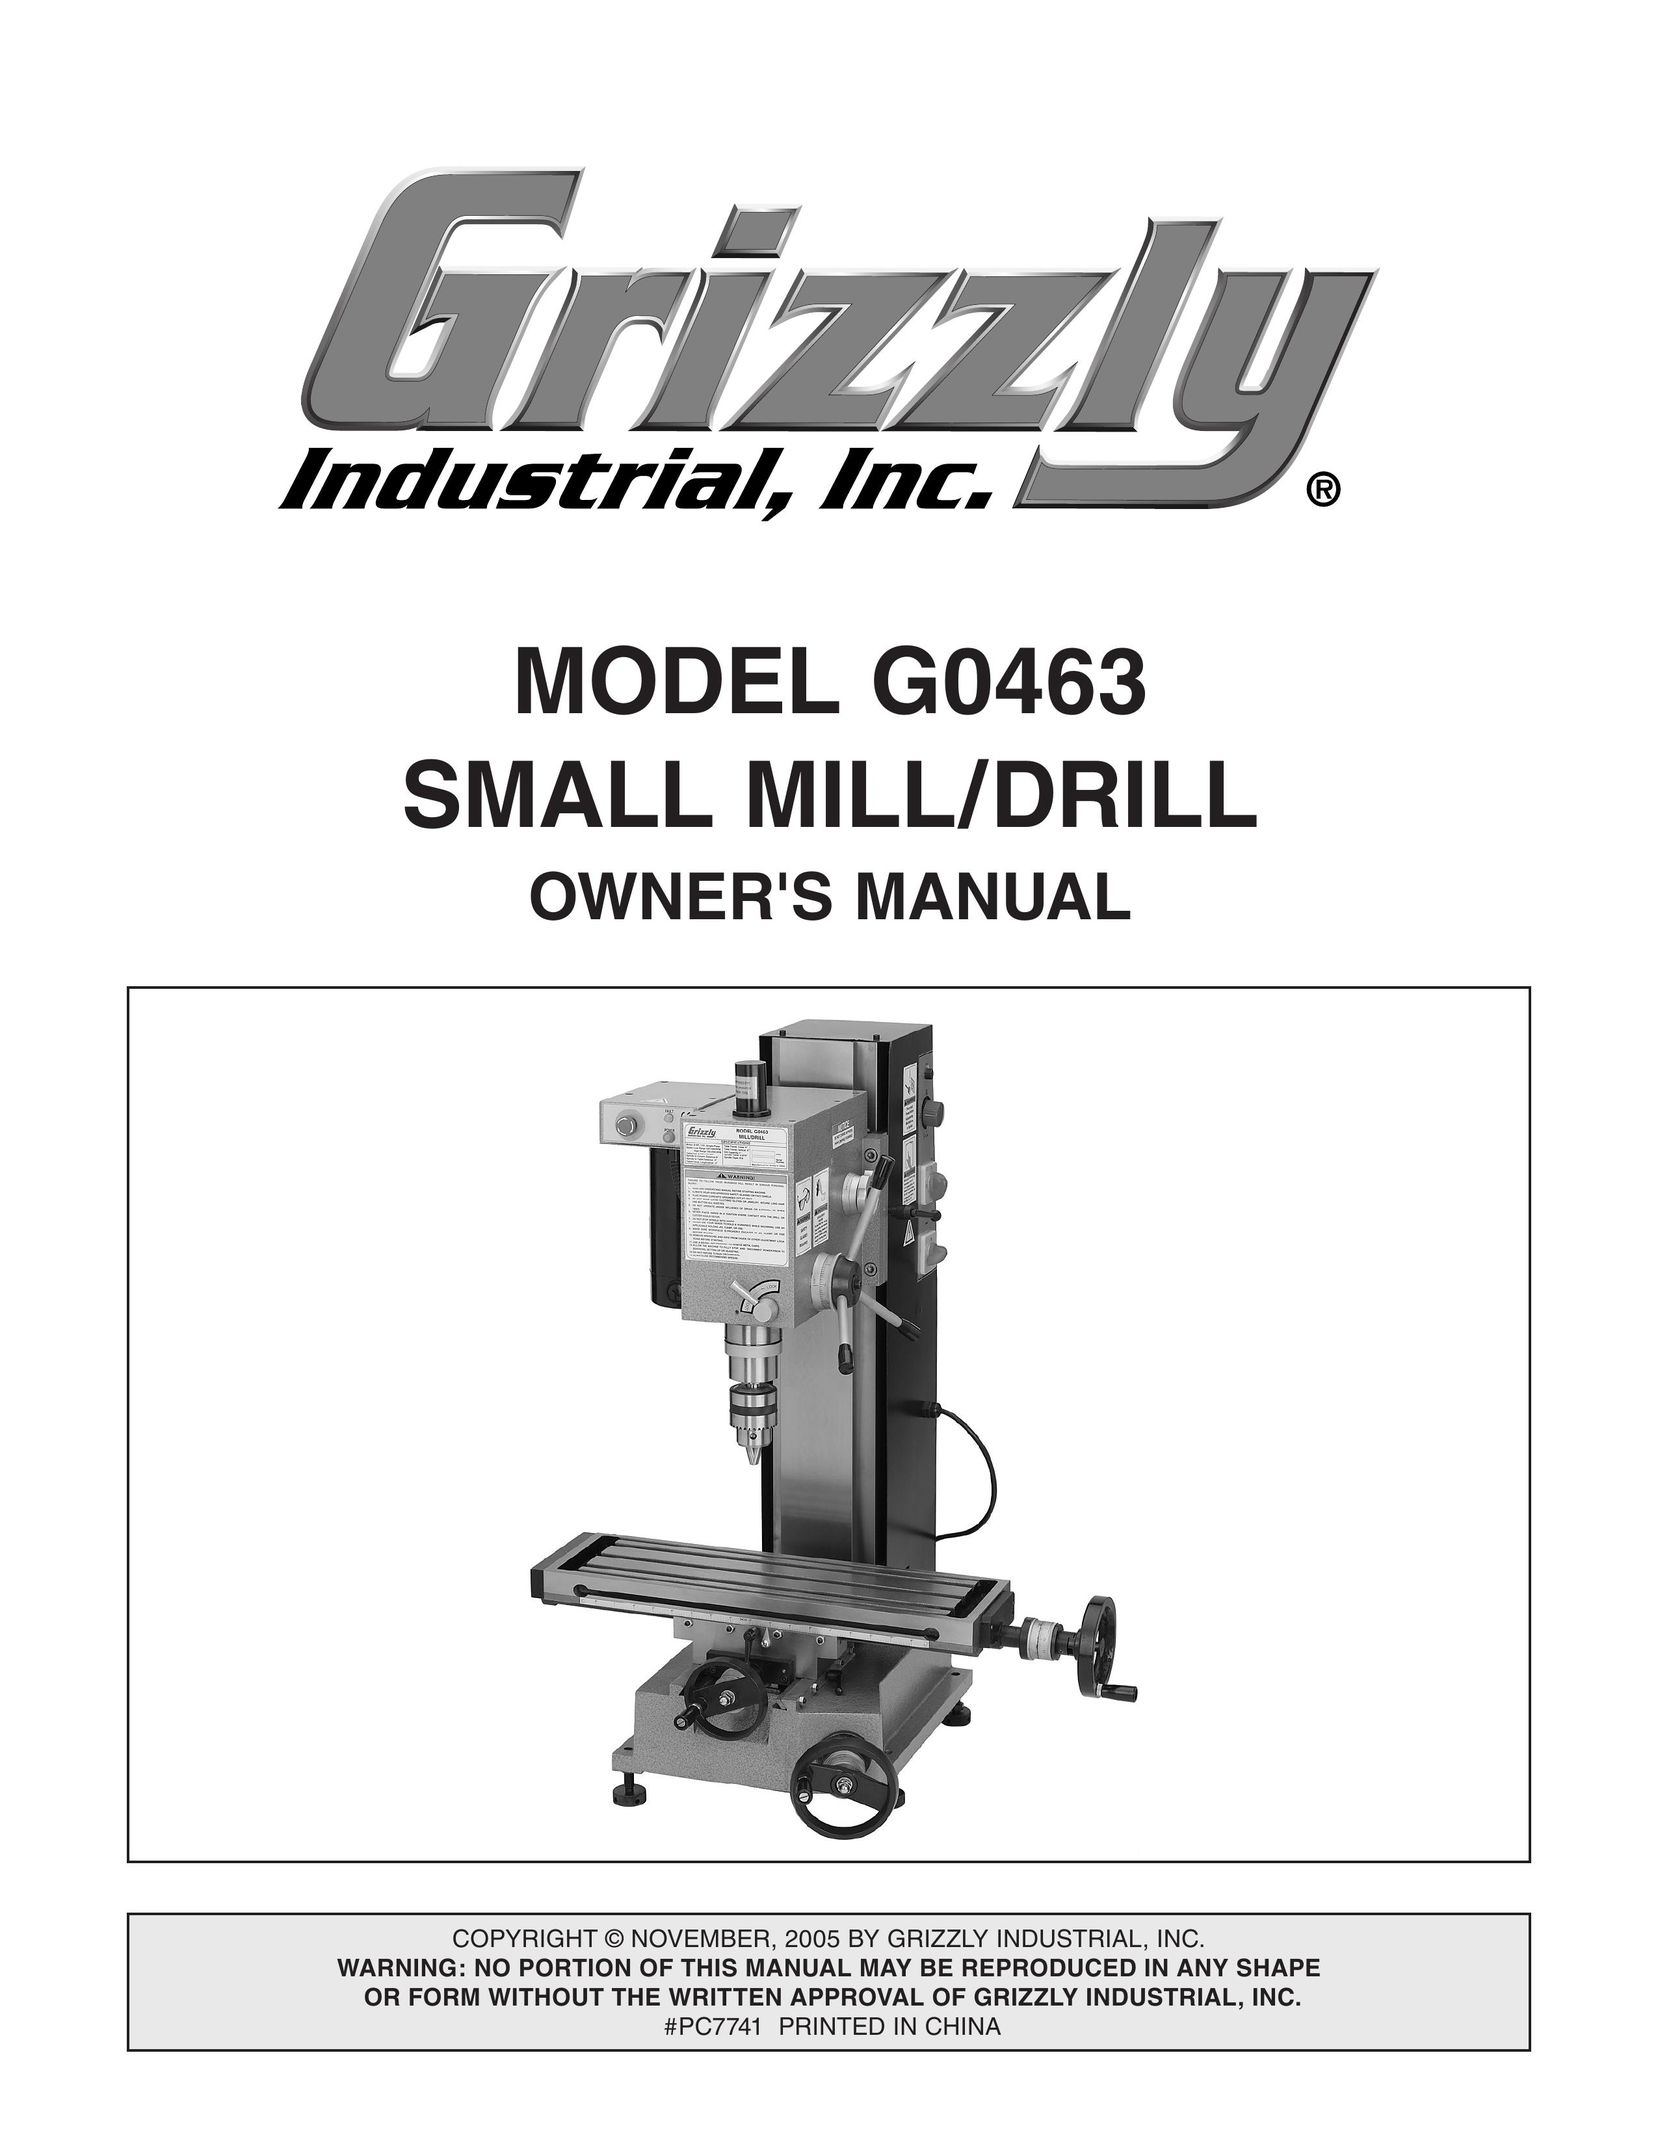 Grizzly G0463 Drill User Manual